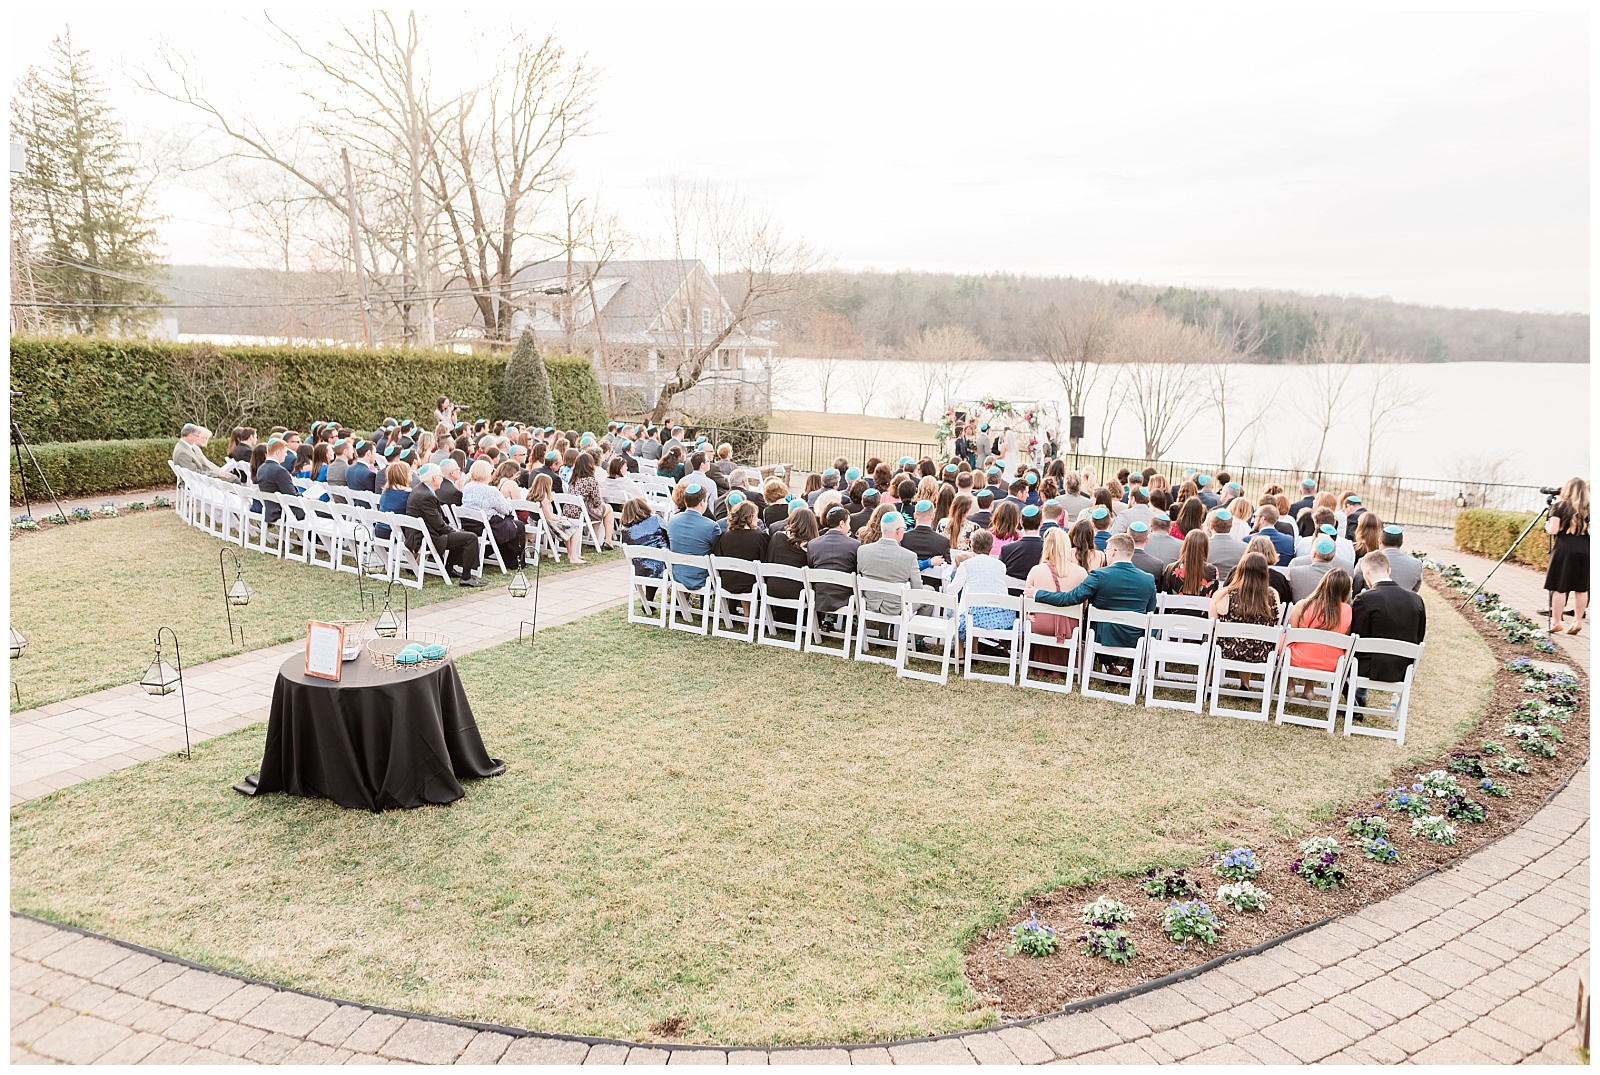 Sunset wedding ceremony at The Lake House Inn in Perkasie, PA.